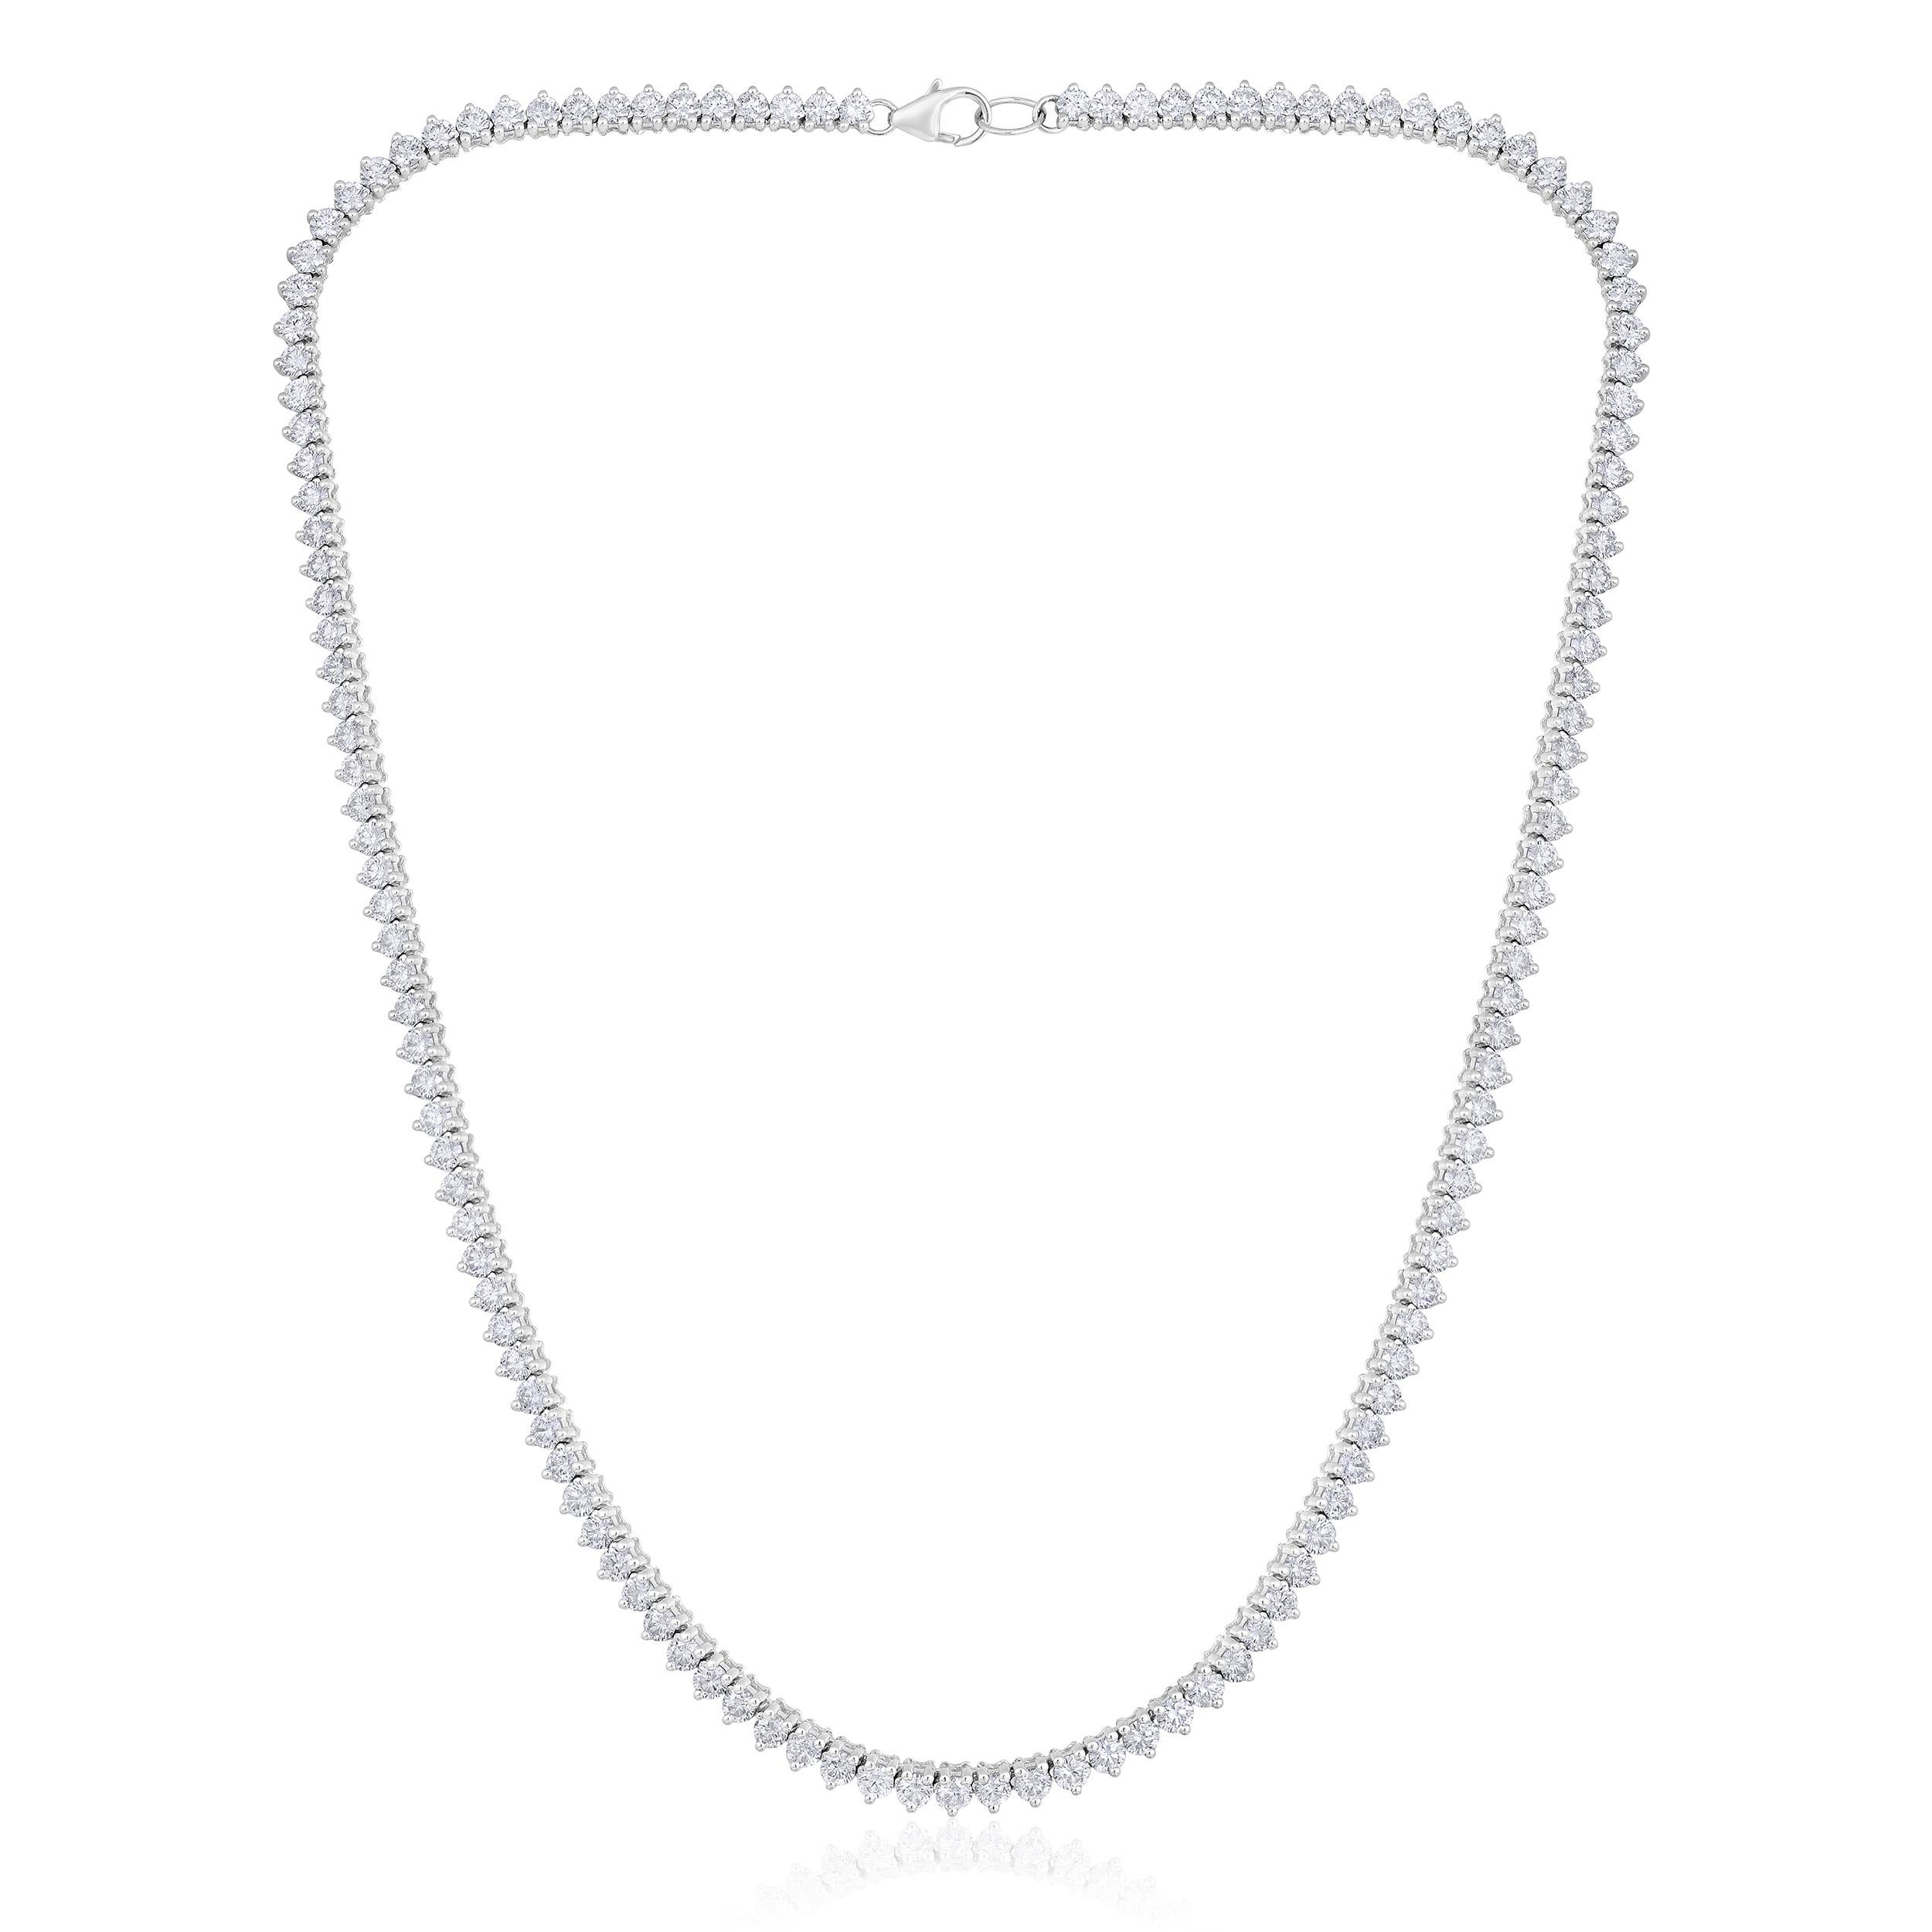 Crafted in 18.8 grams of 14K White Gold, the necklace contains 131 stones of Round Diamonds with a total of 8.61 carat in F-G color and VS-SI carat. The necklace length is 16 inches.

CONTEMPORARY AND TIMELESS ESSENCE: Crafted in 14-karat/18-karat